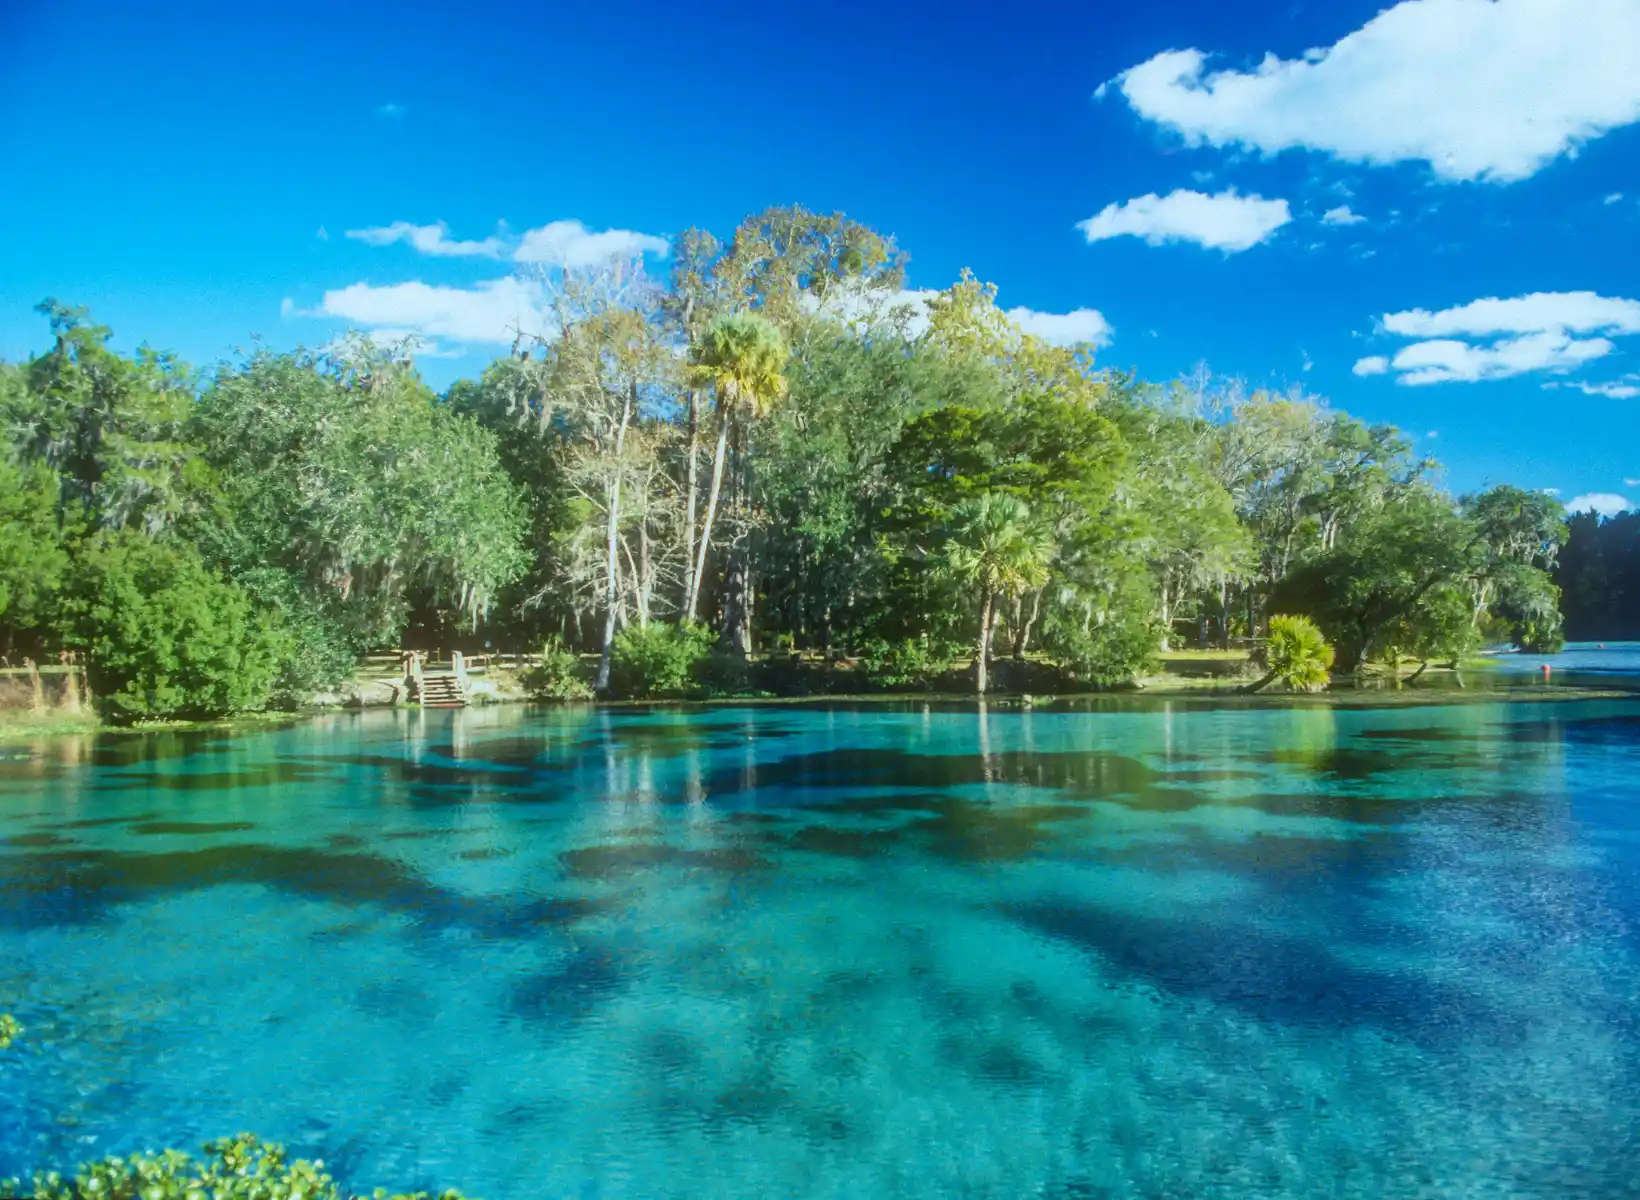 Best Dog Friendly Natural Springs in Florida